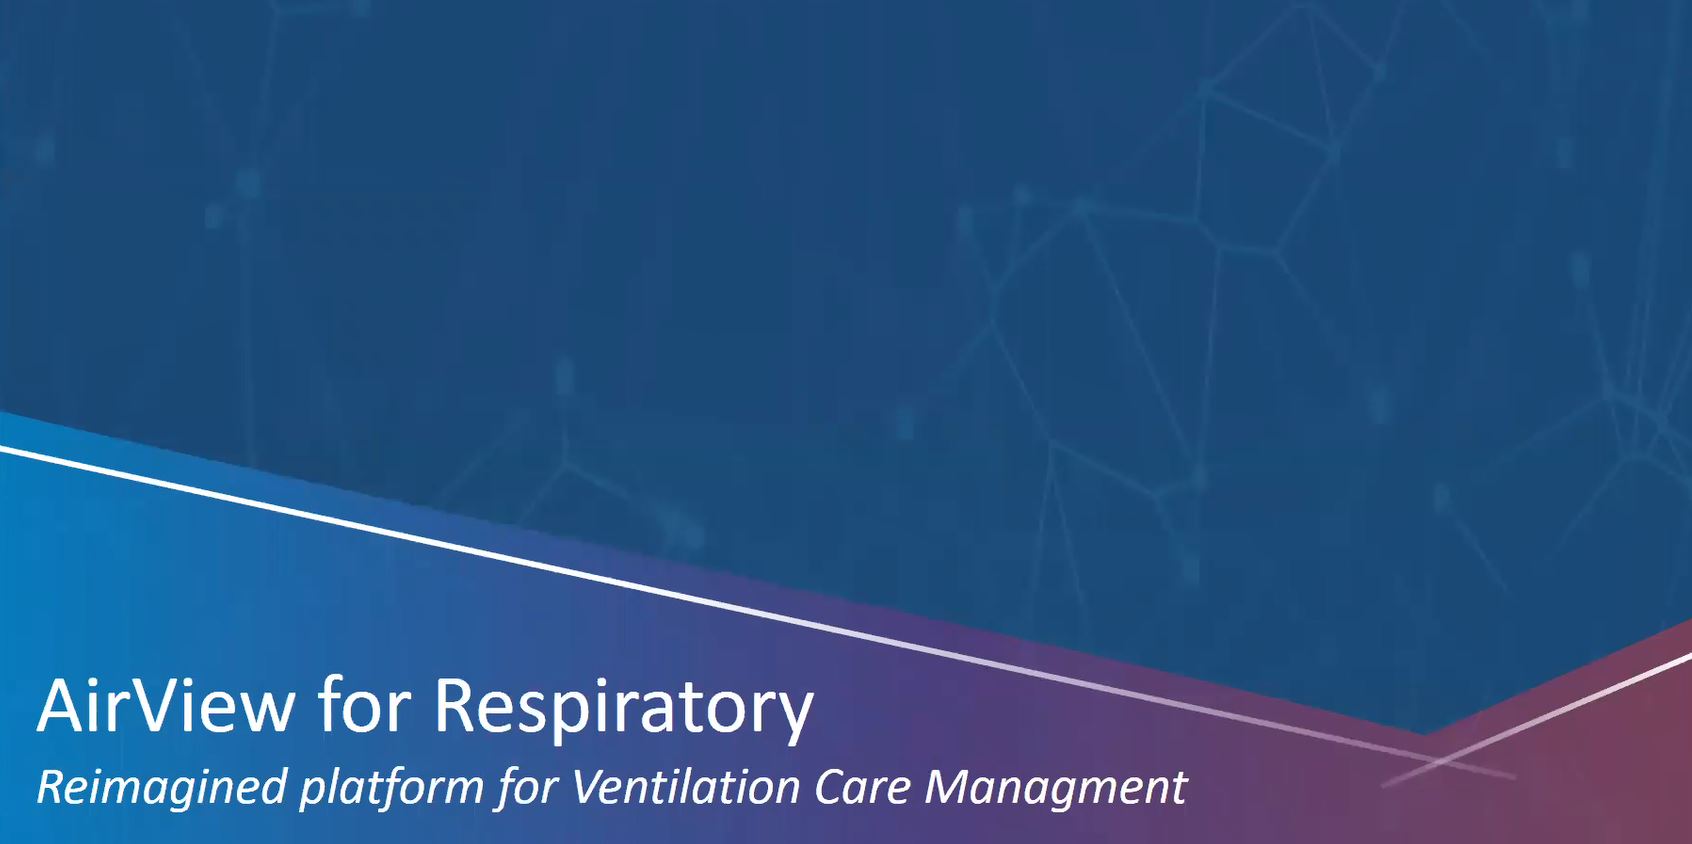 Management by Exception for Respiratory Care